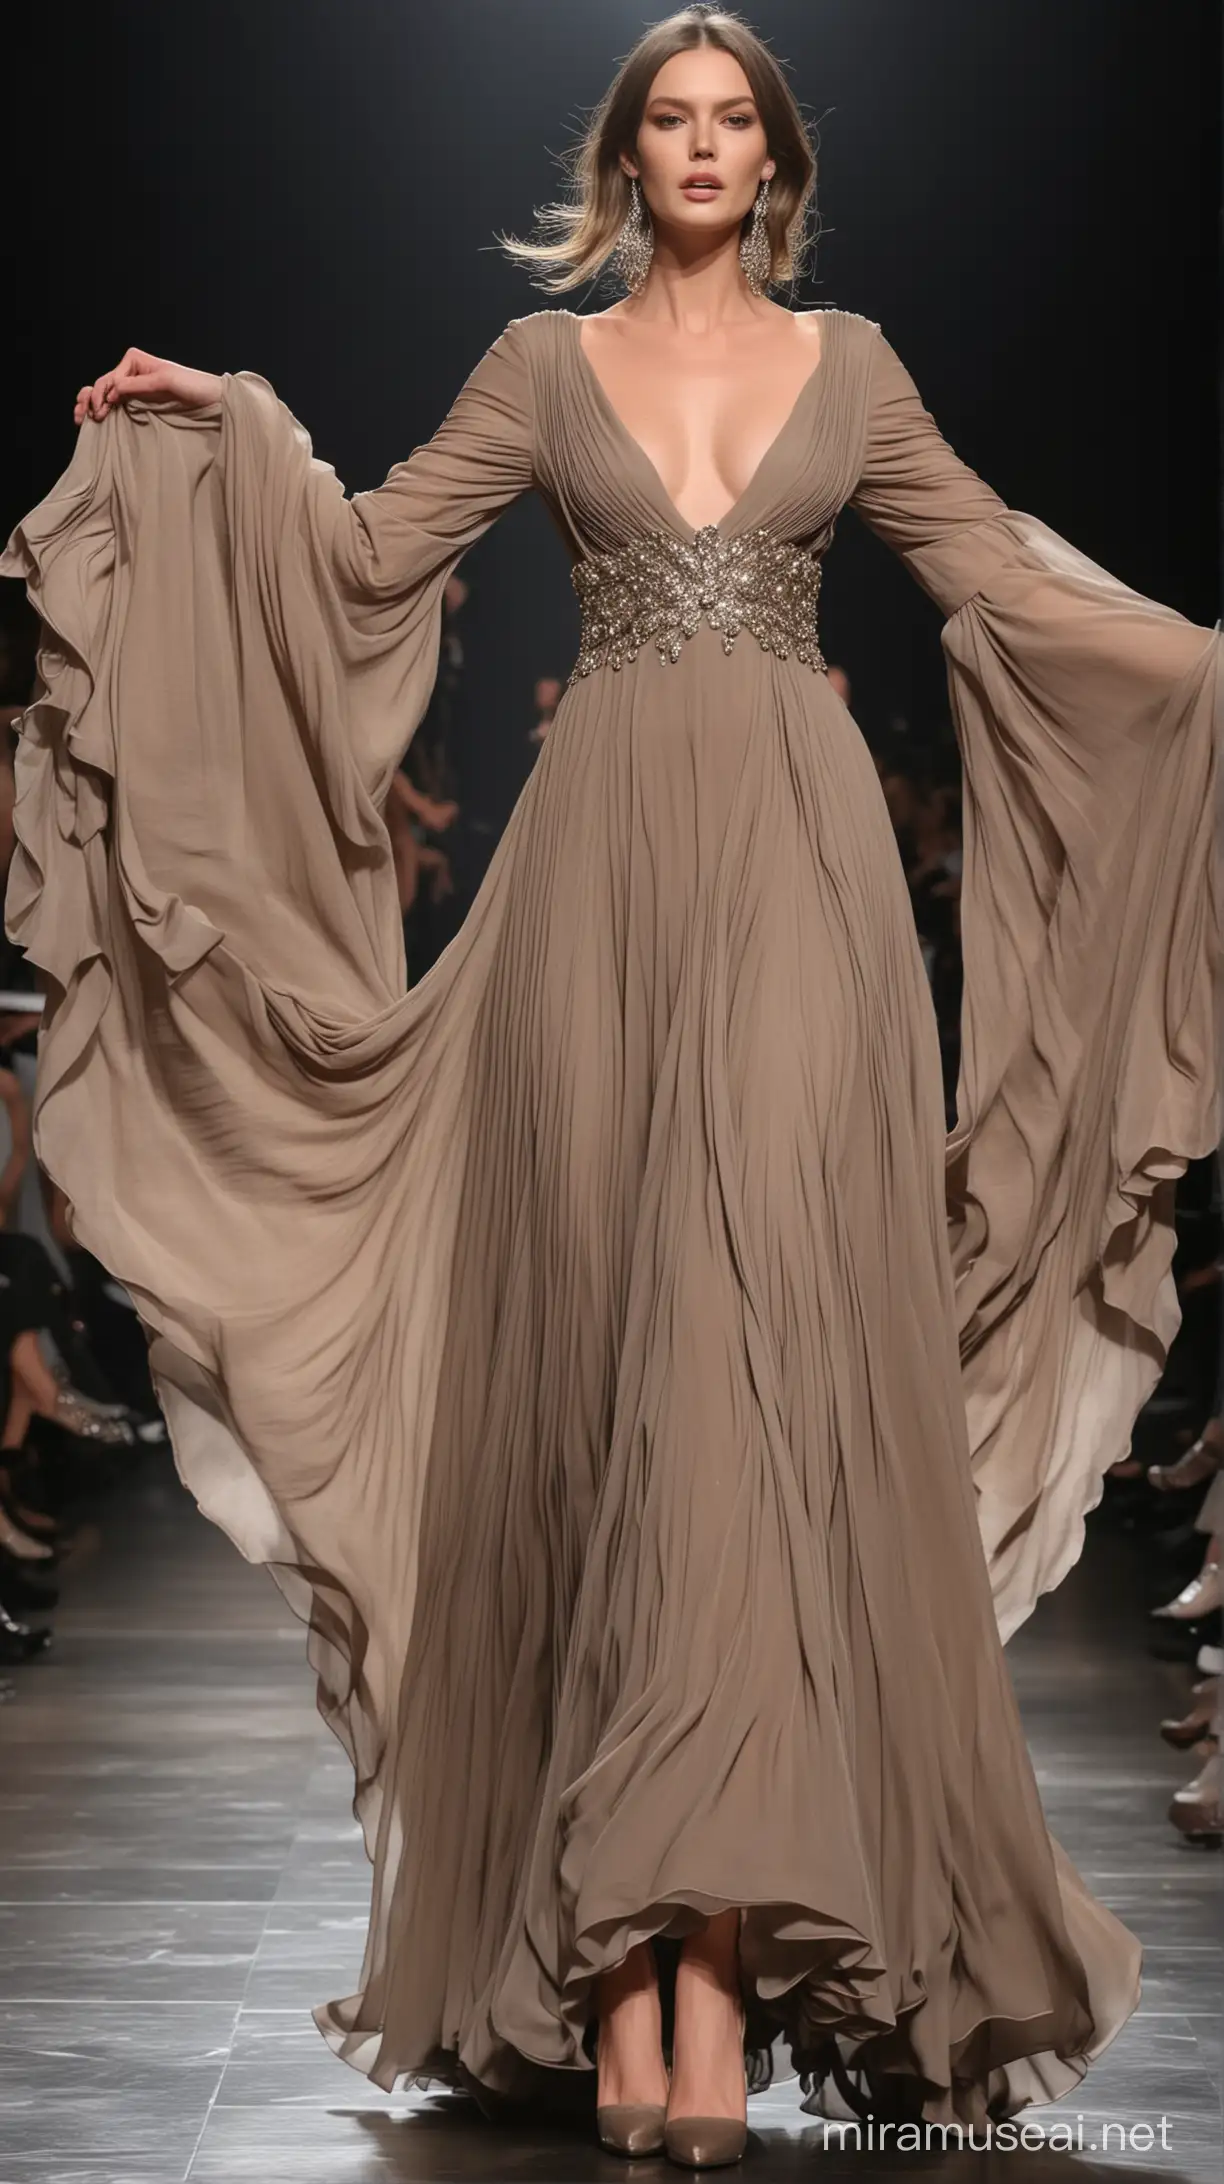 Stunning supermodel runway motion, front angle, wearing a long, large dramatic bell sleeves,  foil coated plain taupe chiffon dress with deep neckline and long layered skirt, hands in the pockets, glamorous, hyper-realistic, Alexander McQueen style 